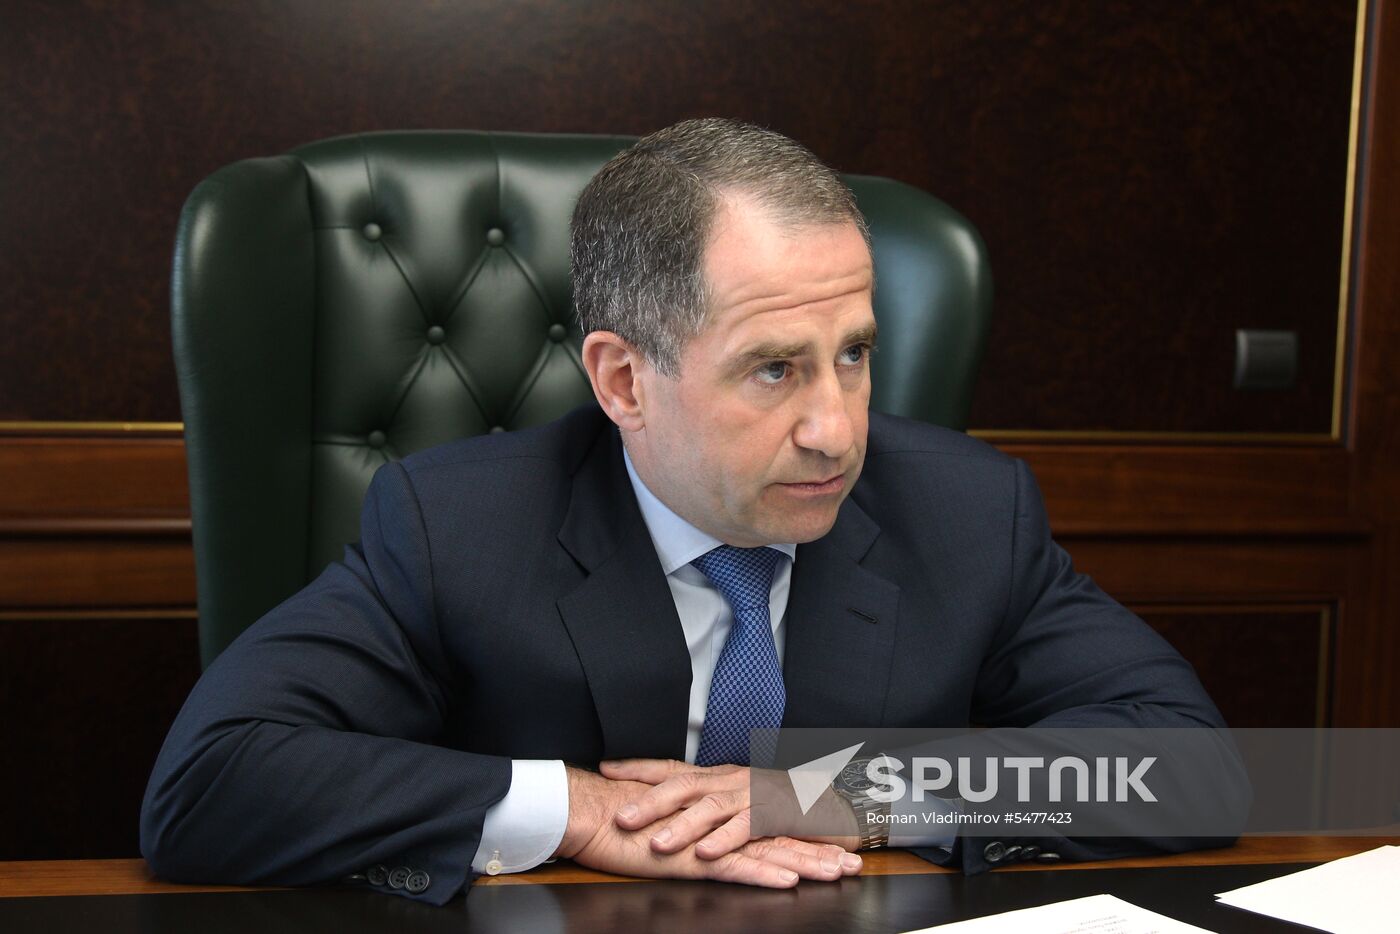 Interview with Presidential Plenipotentiary Envoy to Volga Federal District Mikhail Babich